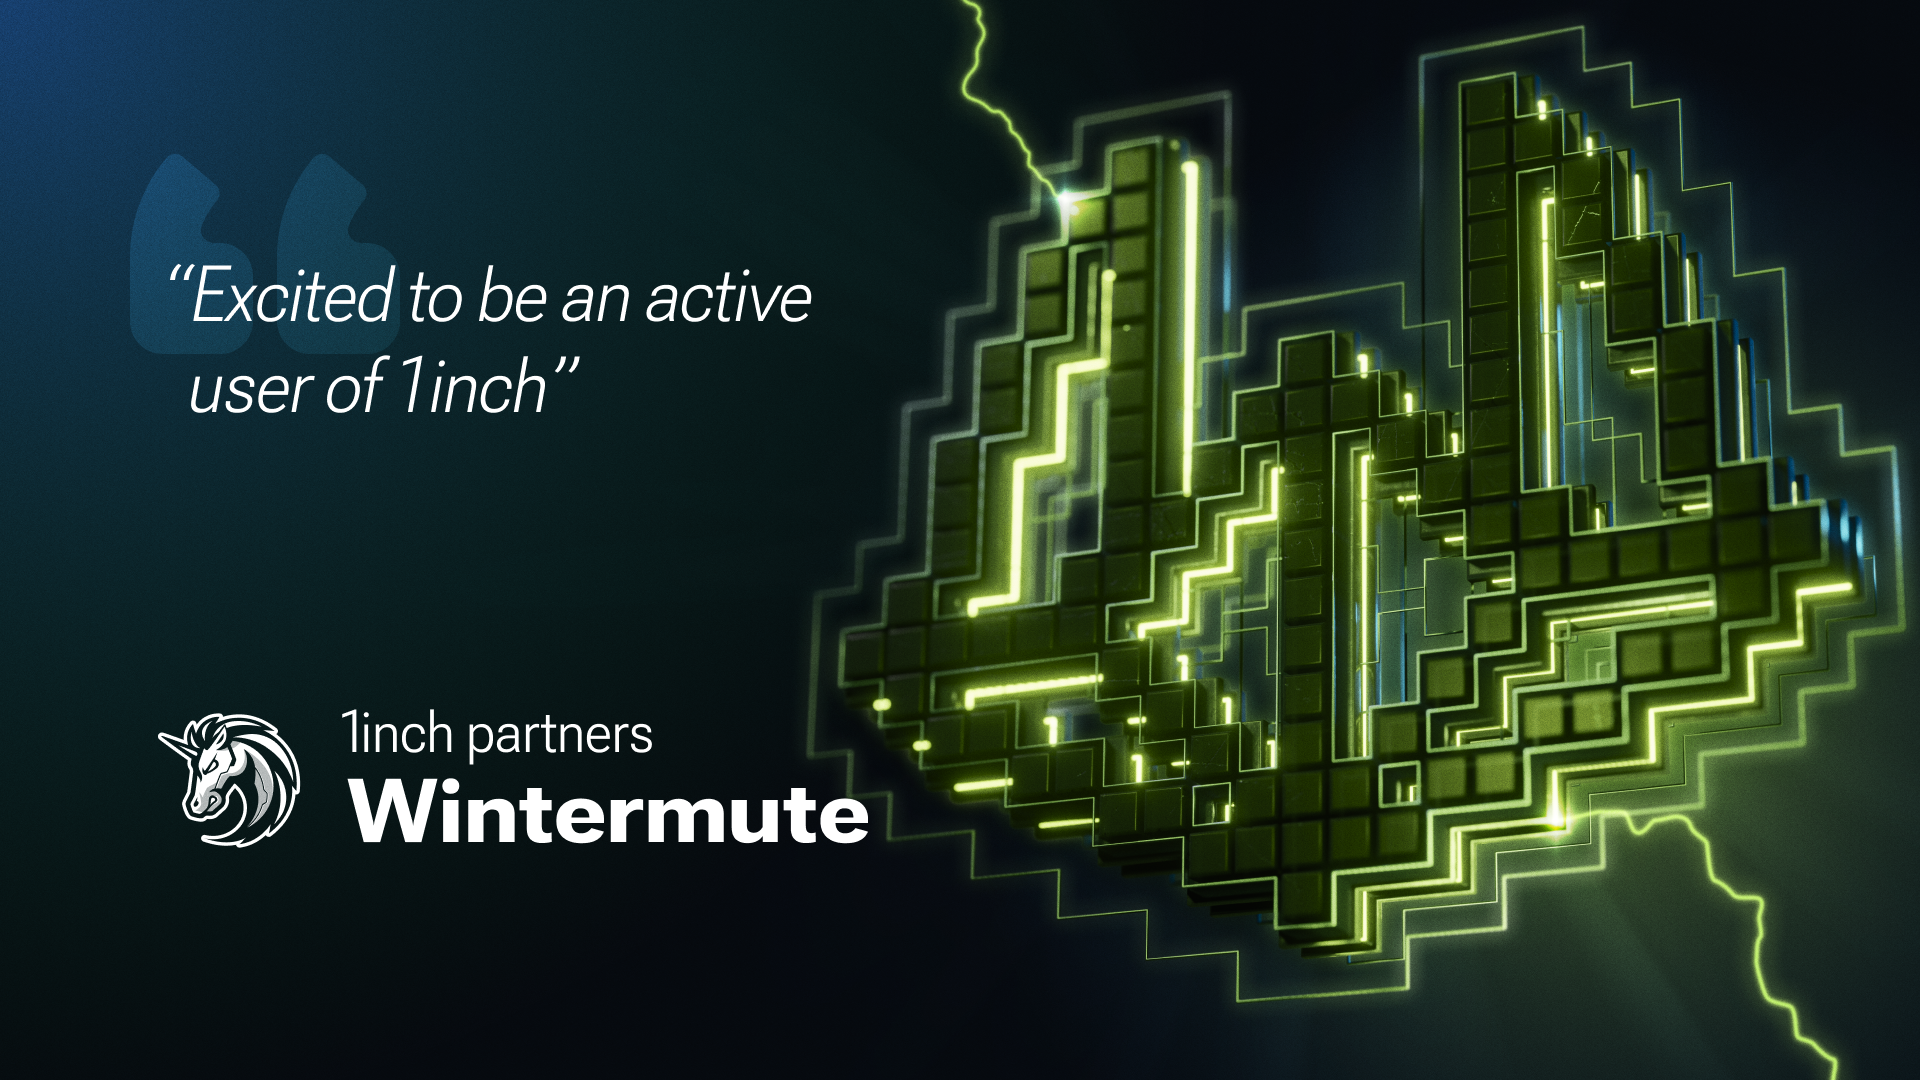 Wintermute: “Excited to be an active user of 1inch”